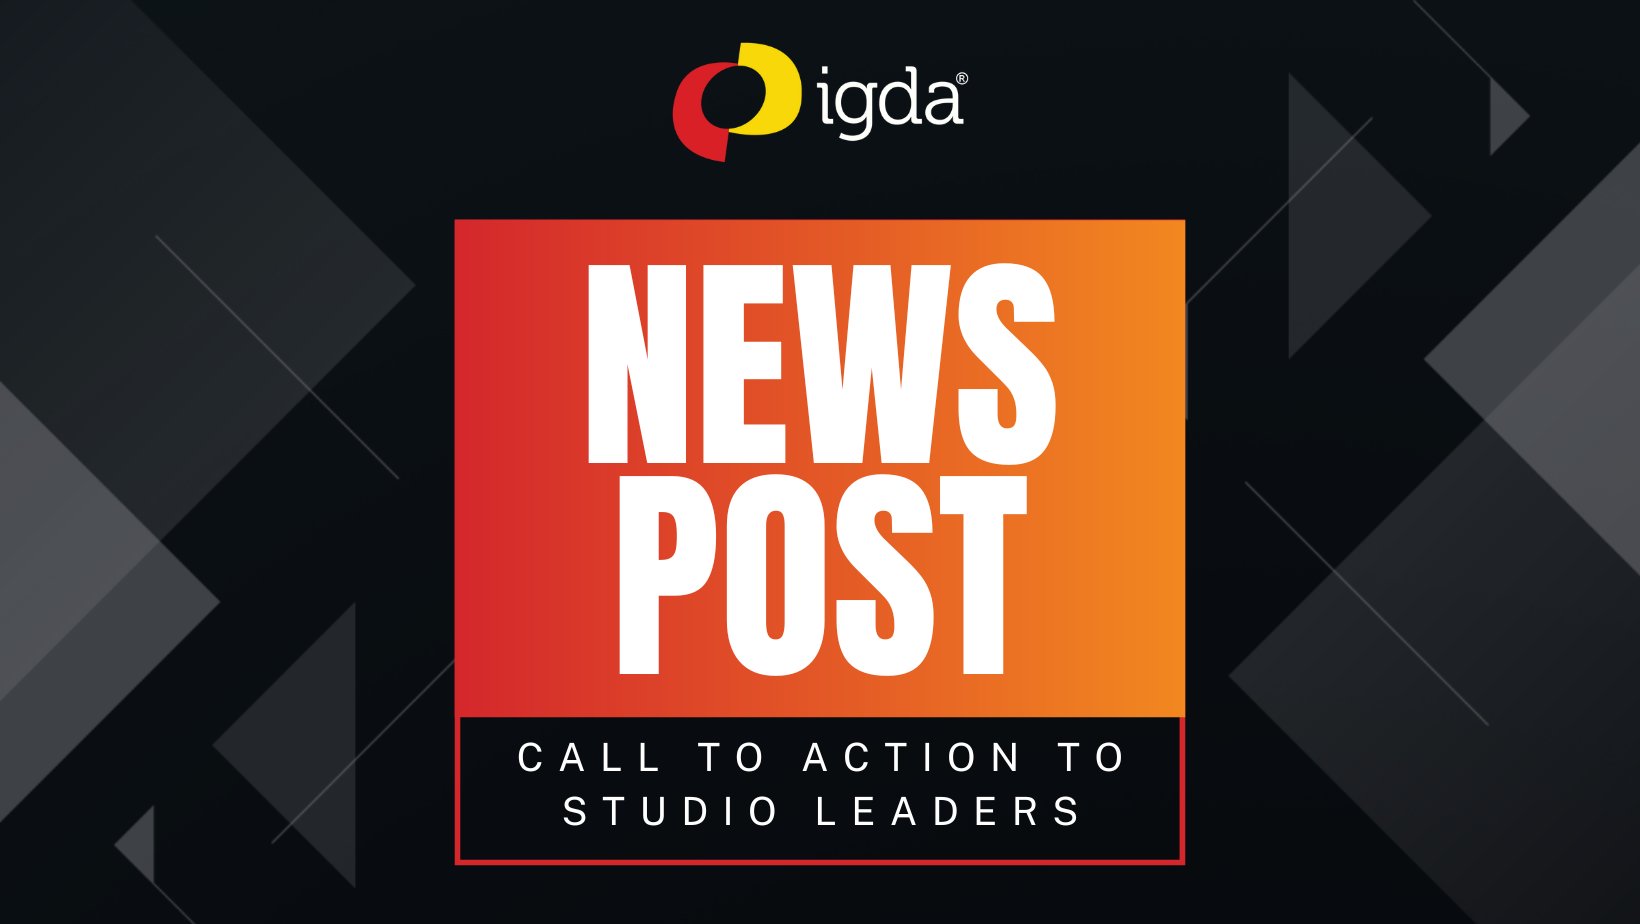 IGDA releases statement supporting the 8,700+ developers affected by layoffs